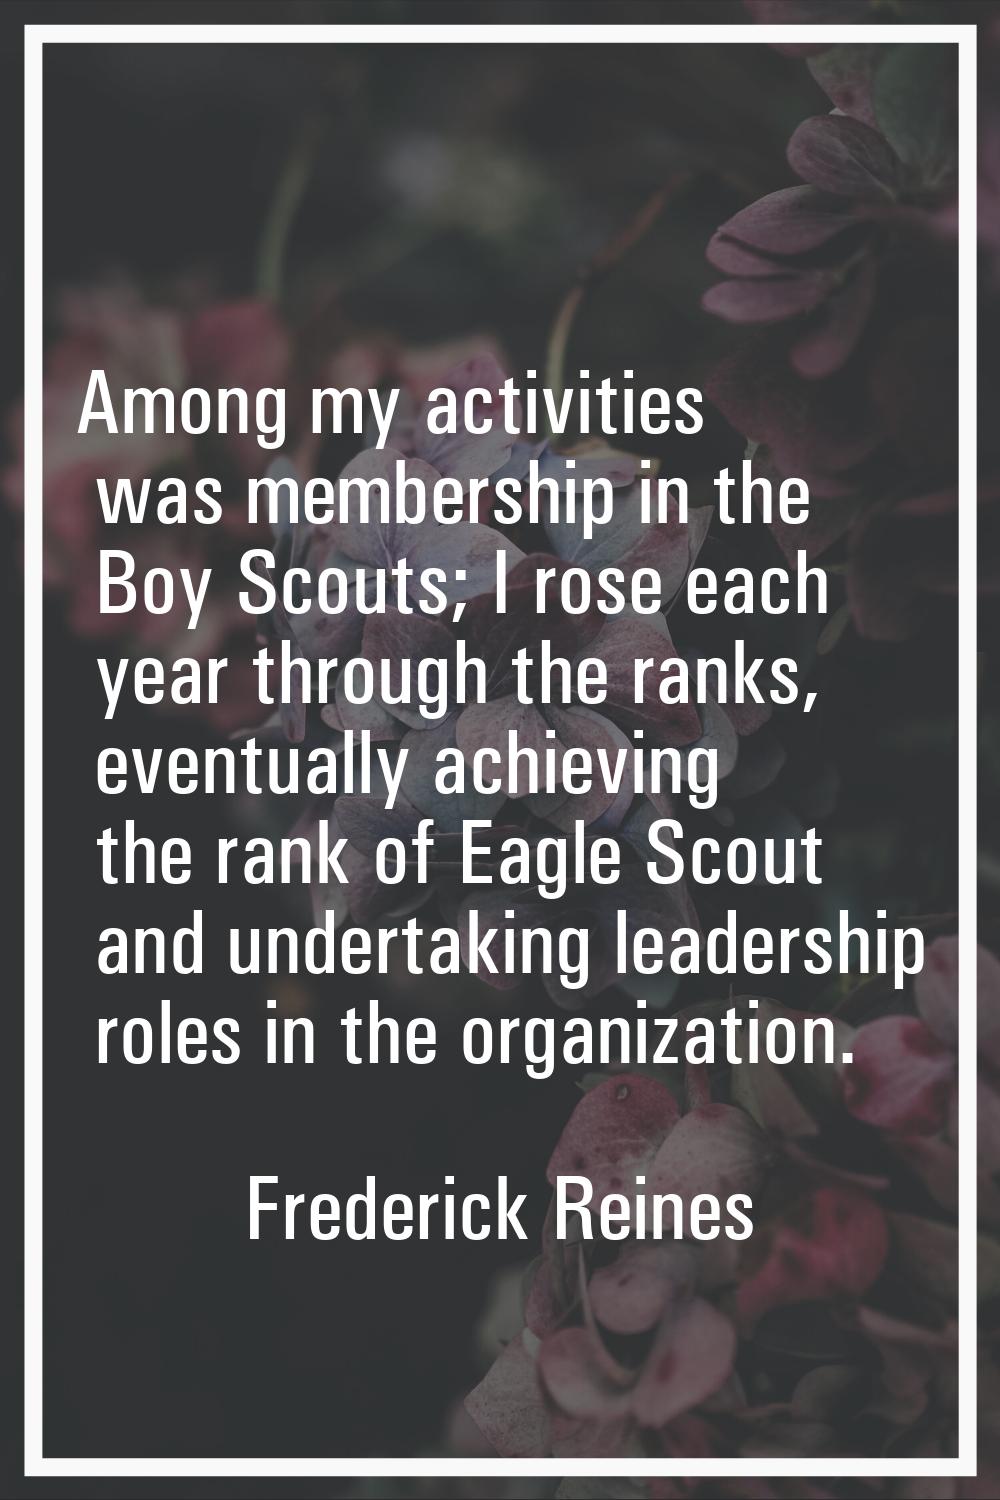 Among my activities was membership in the Boy Scouts; I rose each year through the ranks, eventuall